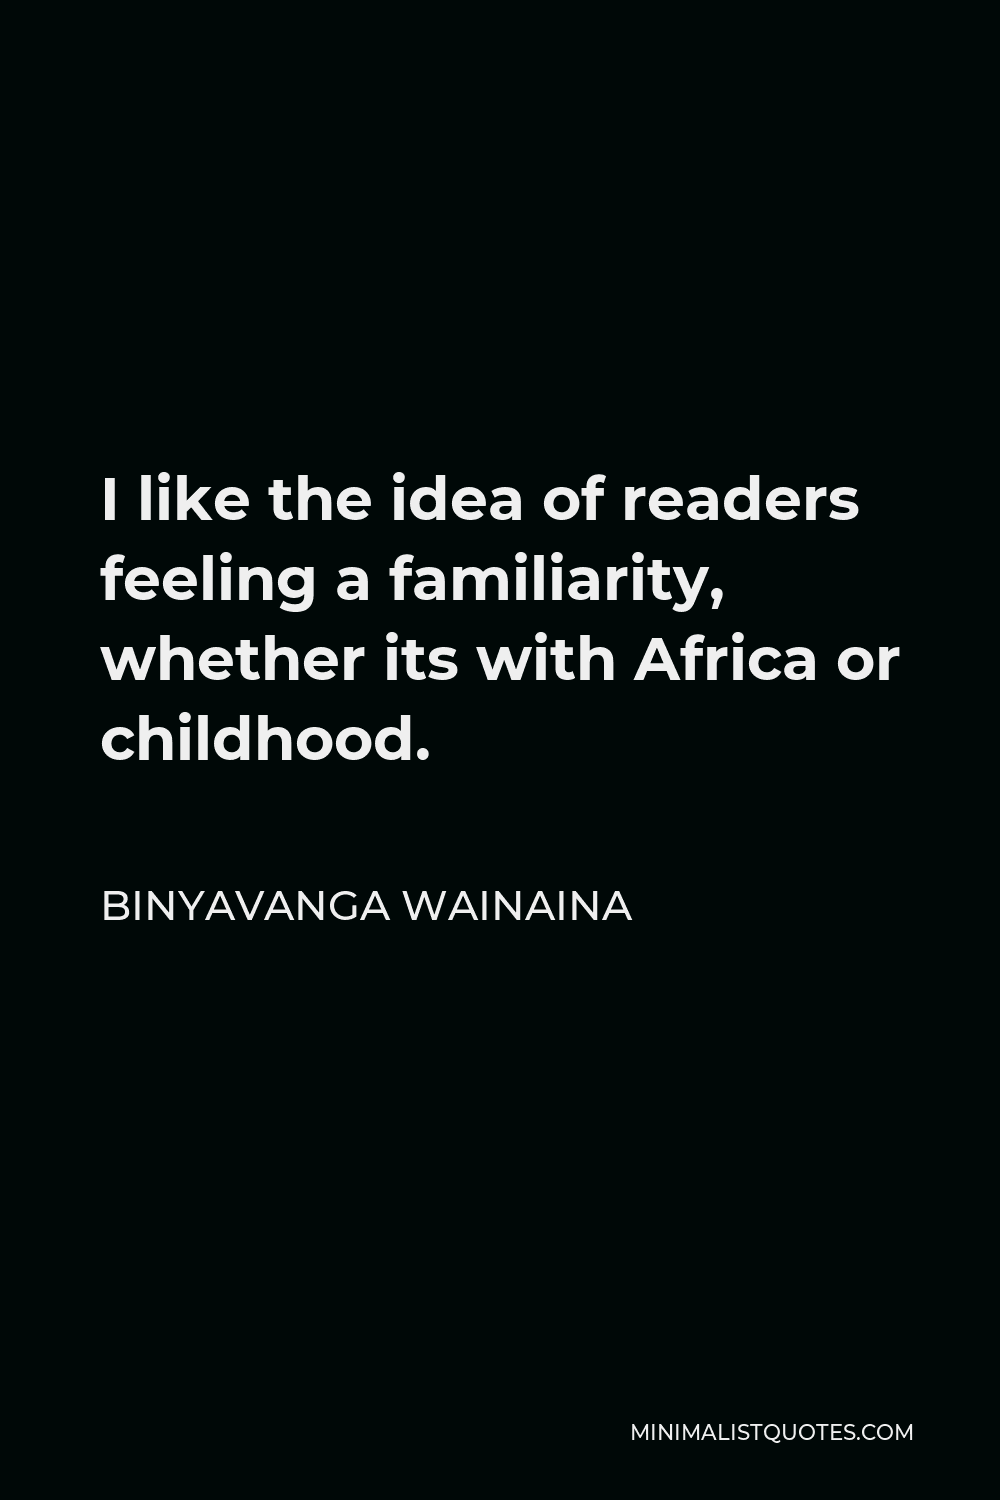 Binyavanga Wainaina Quote - I like the idea of readers feeling a familiarity, whether its with Africa or childhood.